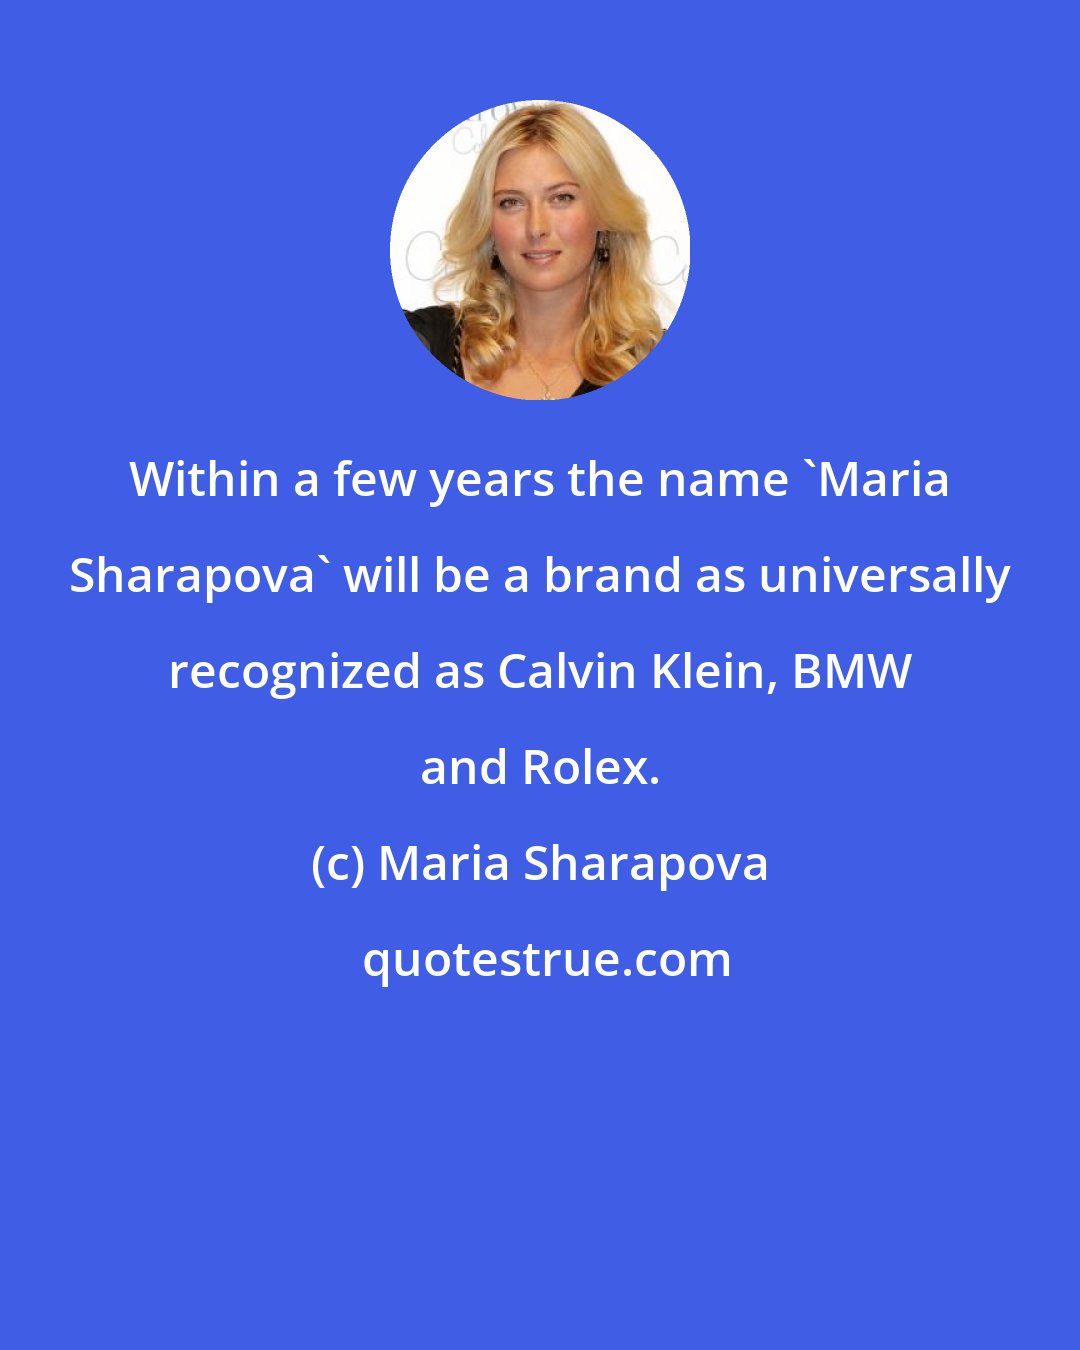 Maria Sharapova: Within a few years the name 'Maria Sharapova' will be a brand as universally recognized as Calvin Klein, BMW and Rolex.